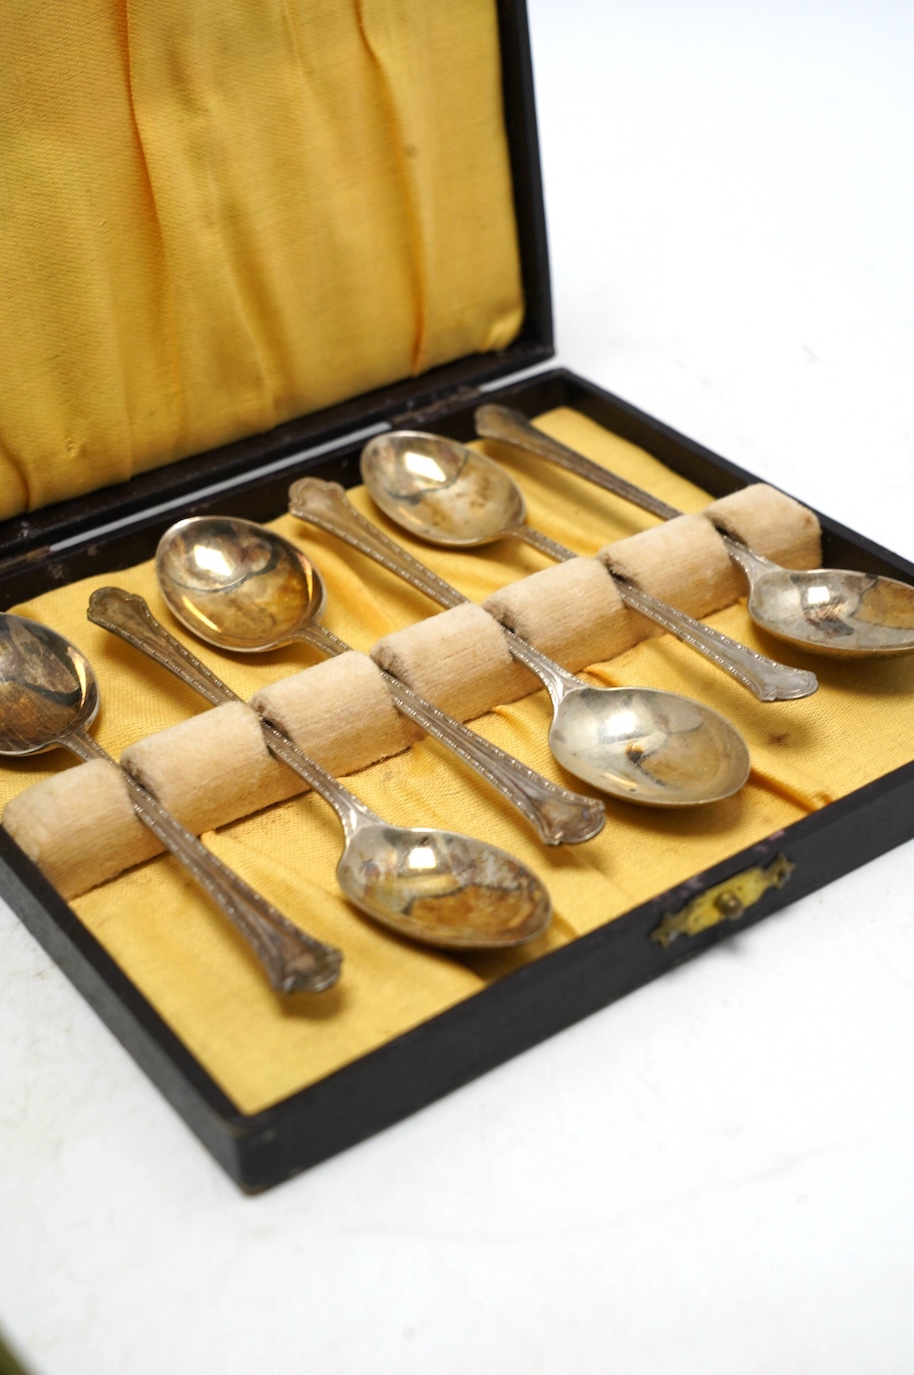 Sundry small silver including cased sets and loose flatware, condiments, a white metal tea strainer and peacock menu holders, etc. Condition - poor to fair